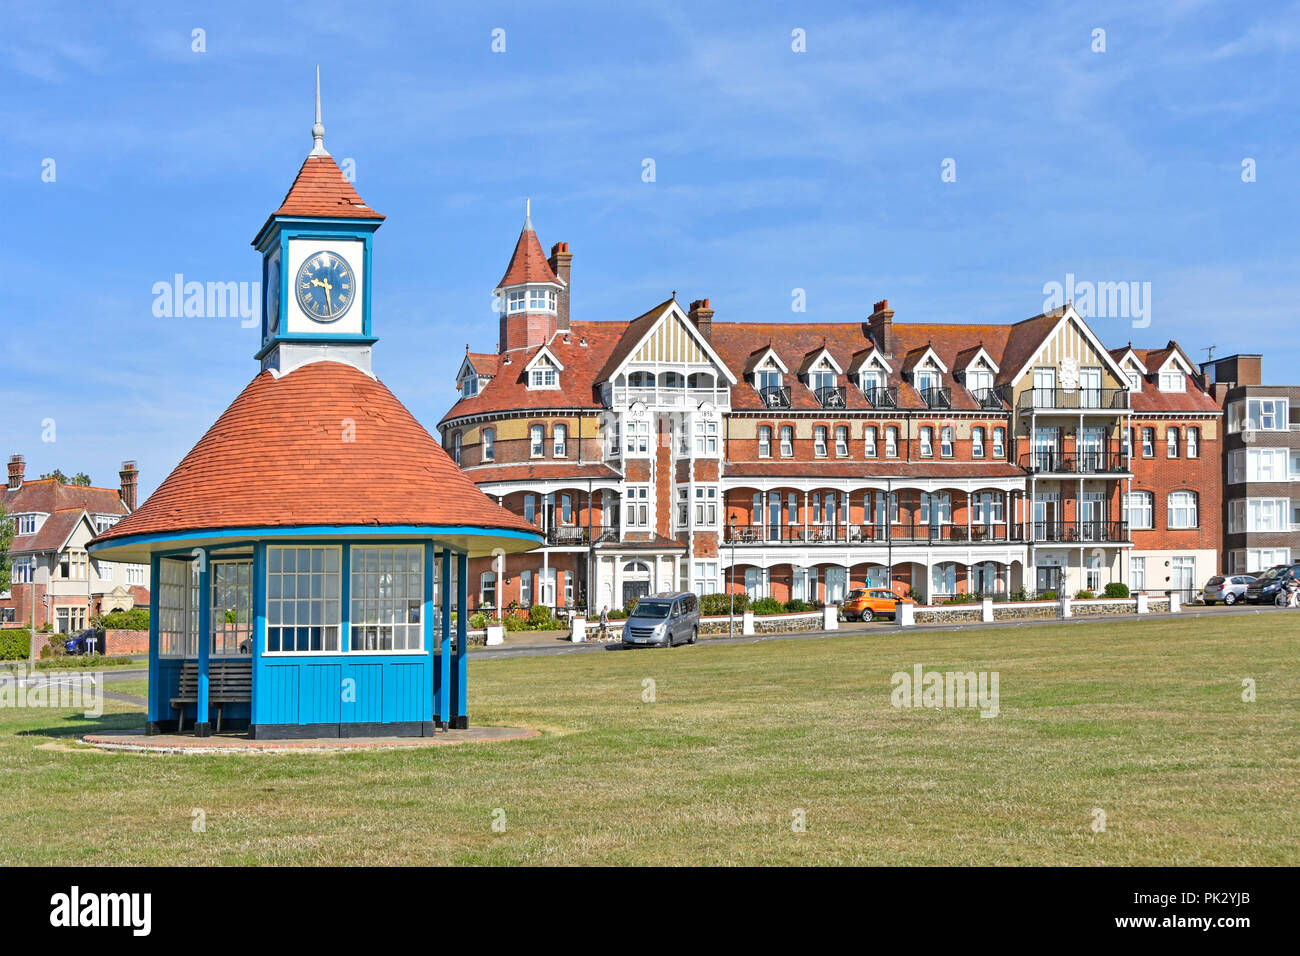 Was Grand Hotel now Grand Apartments  victorian building &  modern clock tower shelter on greensward holiday seaside resort  Frinton on Sea Essex UK Stock Photo